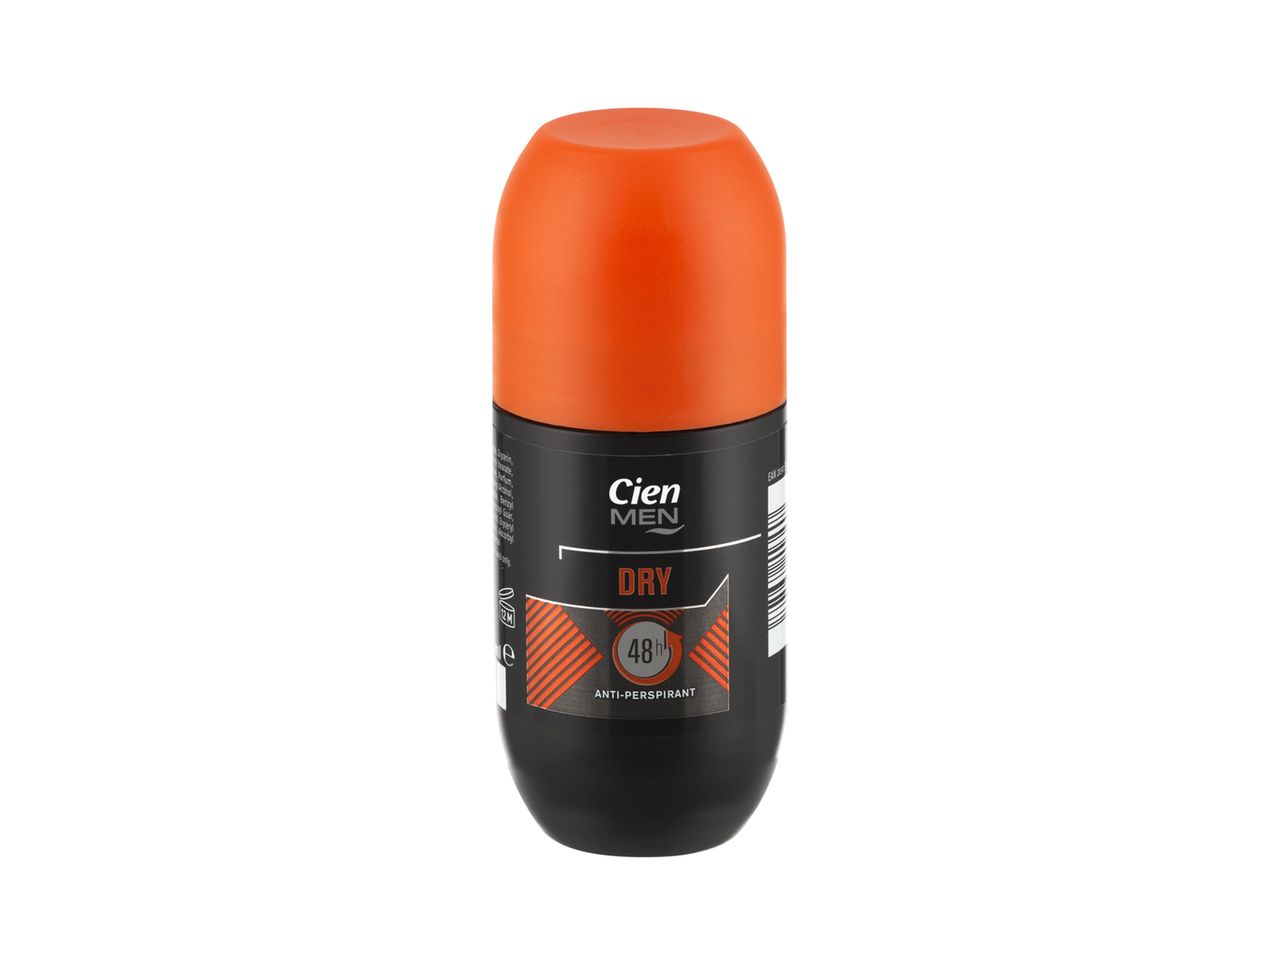 Go to full screen view: Cien Roll On Deodorant for Men - Image 3